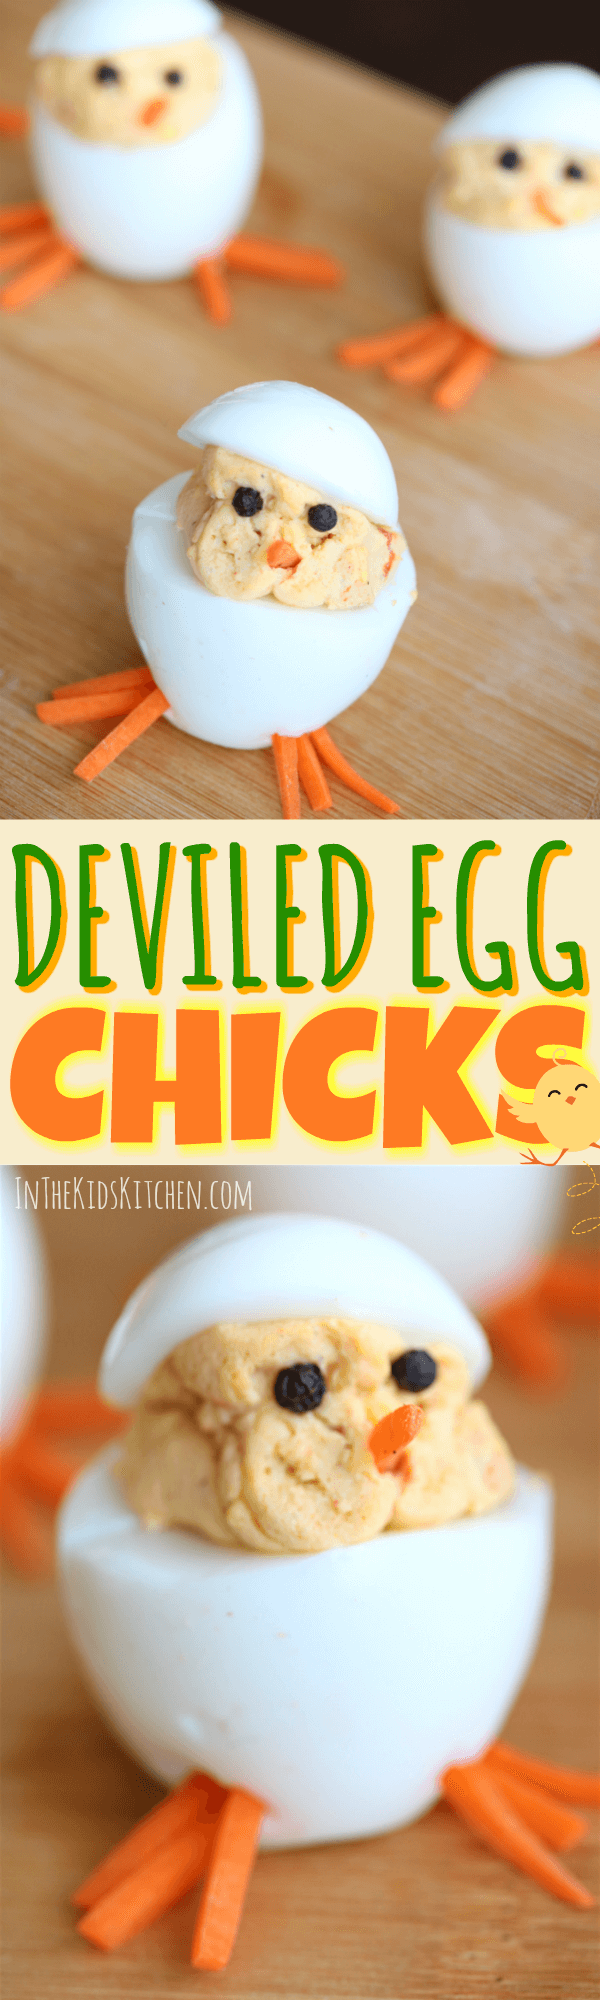 An adorable Easter-themed spin on a favorite party appetizer, these Deviled Eggs Chicks are sure to be a hit with kids and adults alike!